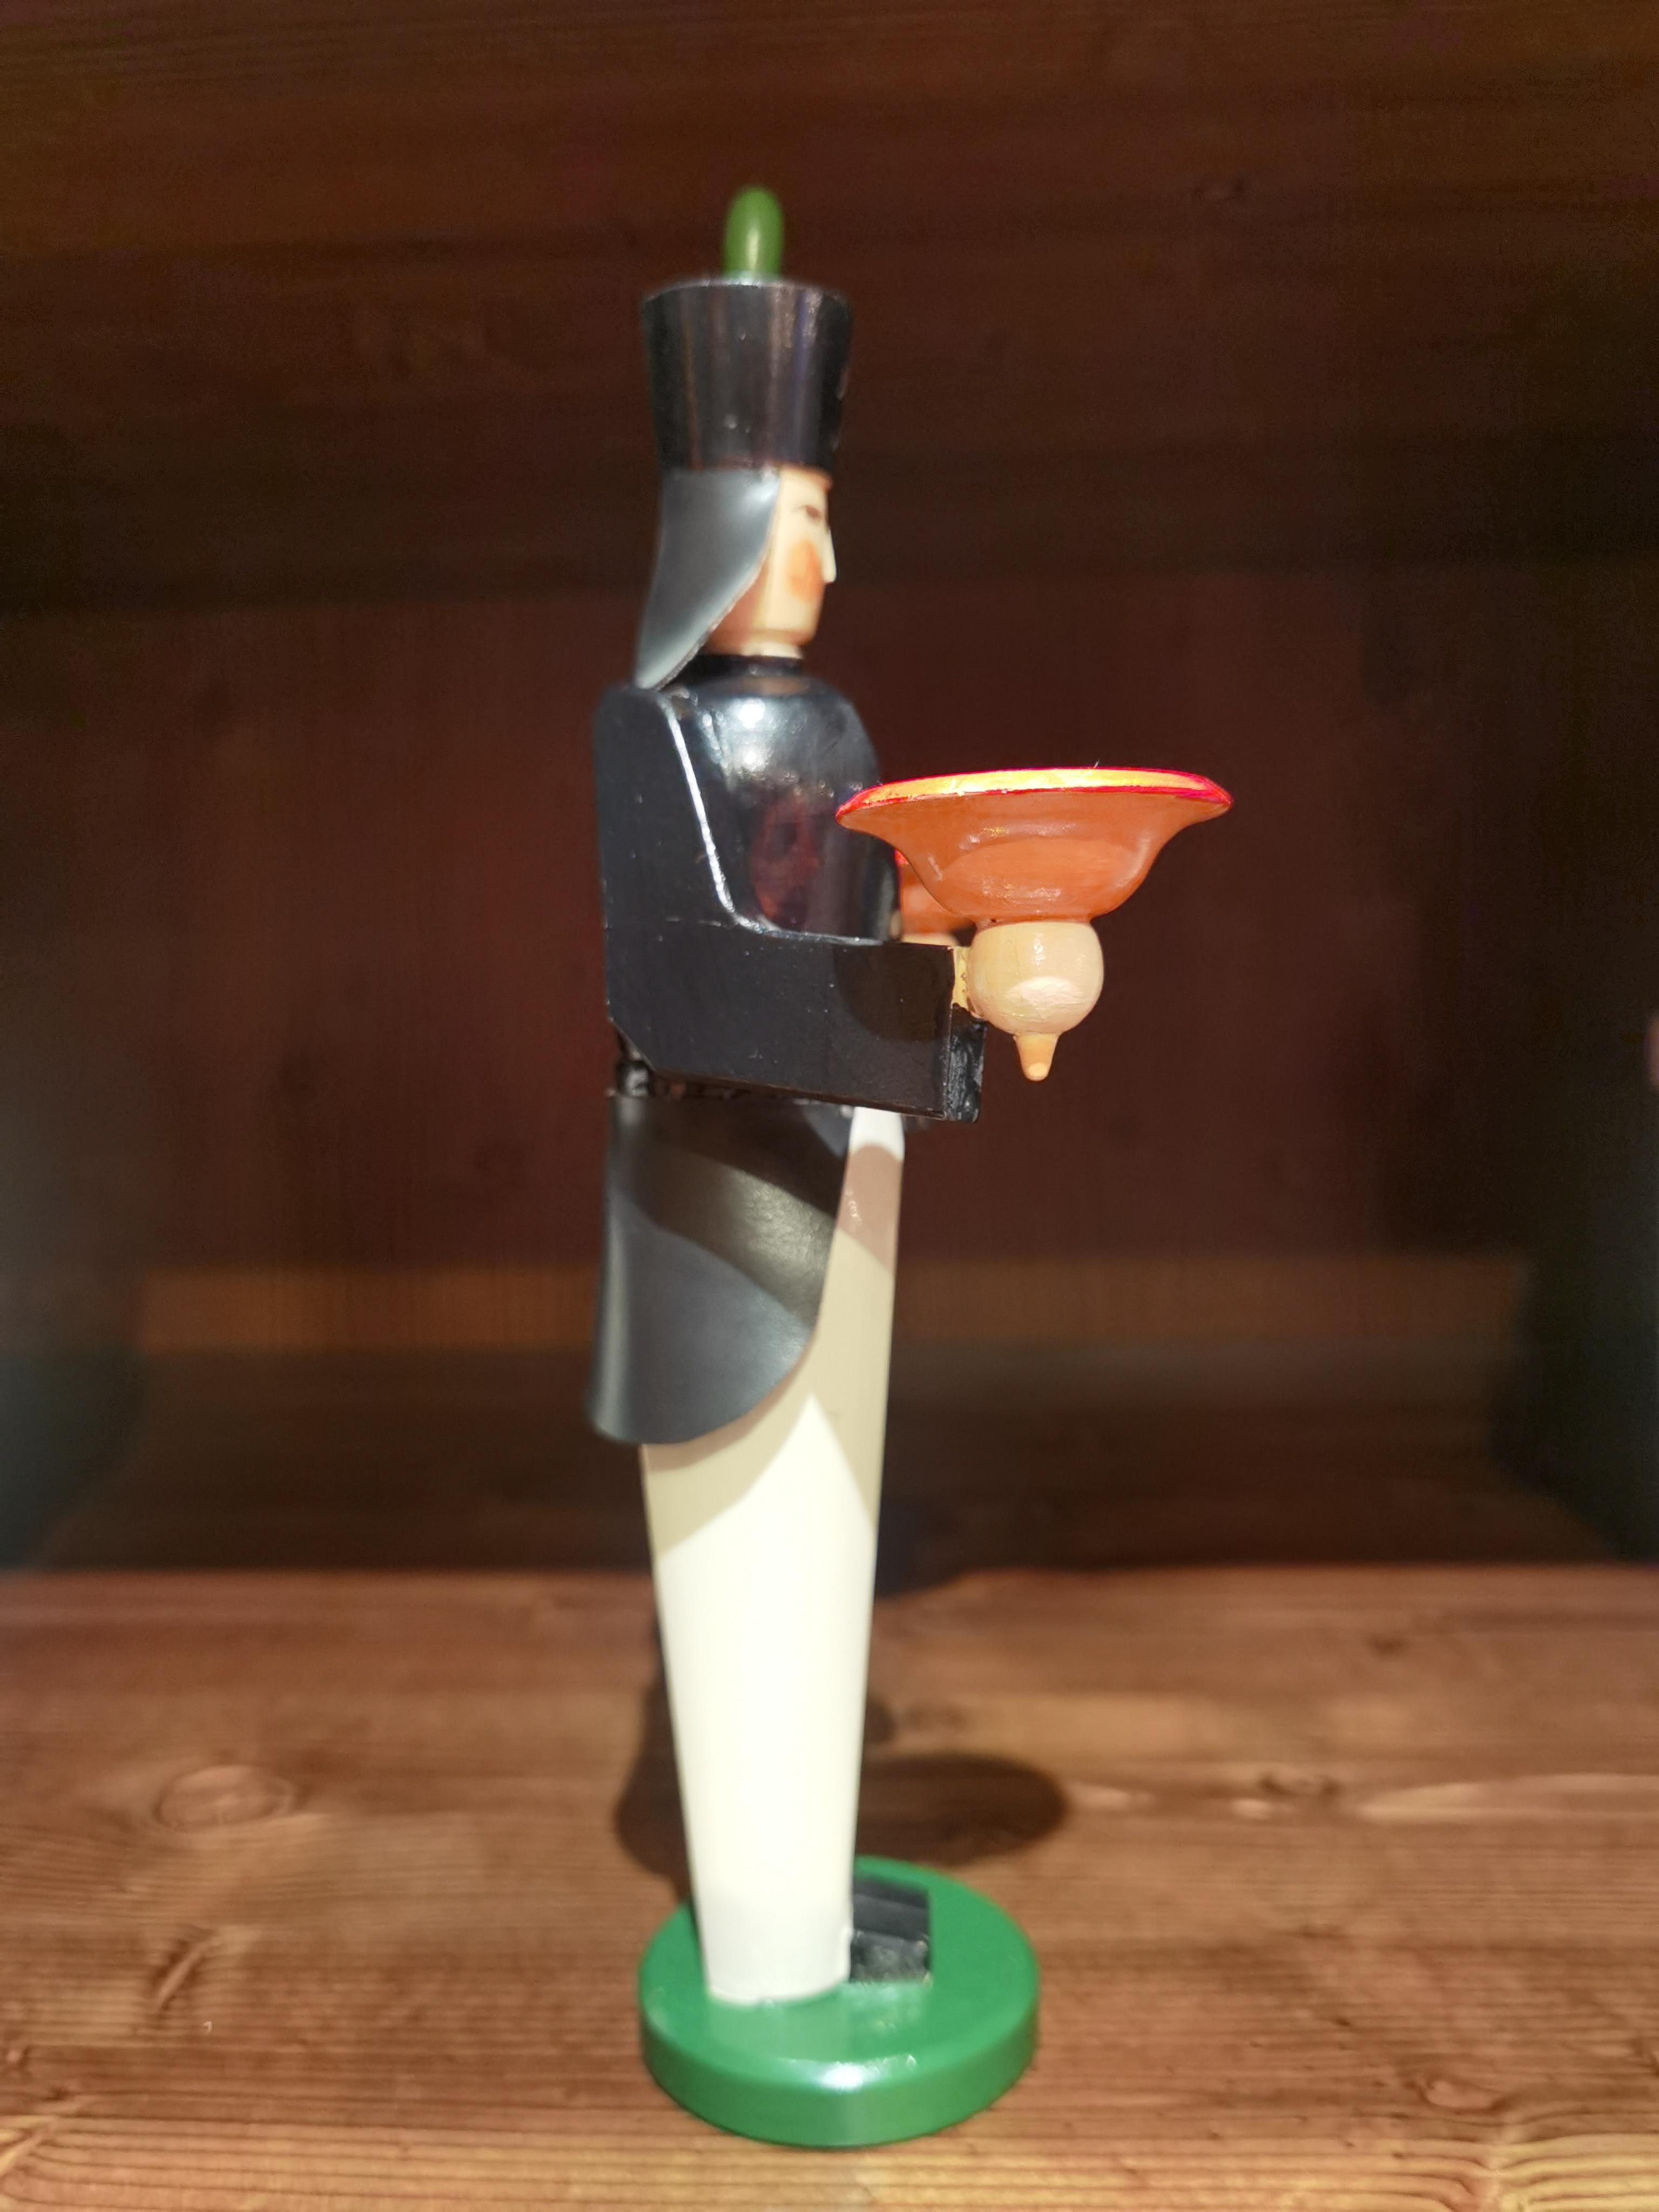 Vintage handmade and hand-painted candle holder in wood in the tradional art of the Erzgebirge. The handmade figures are produced in the area of the Erzgebirge in former Eastern Germany. Made for 2 candles. The region Erzgebirge formerly Eastern